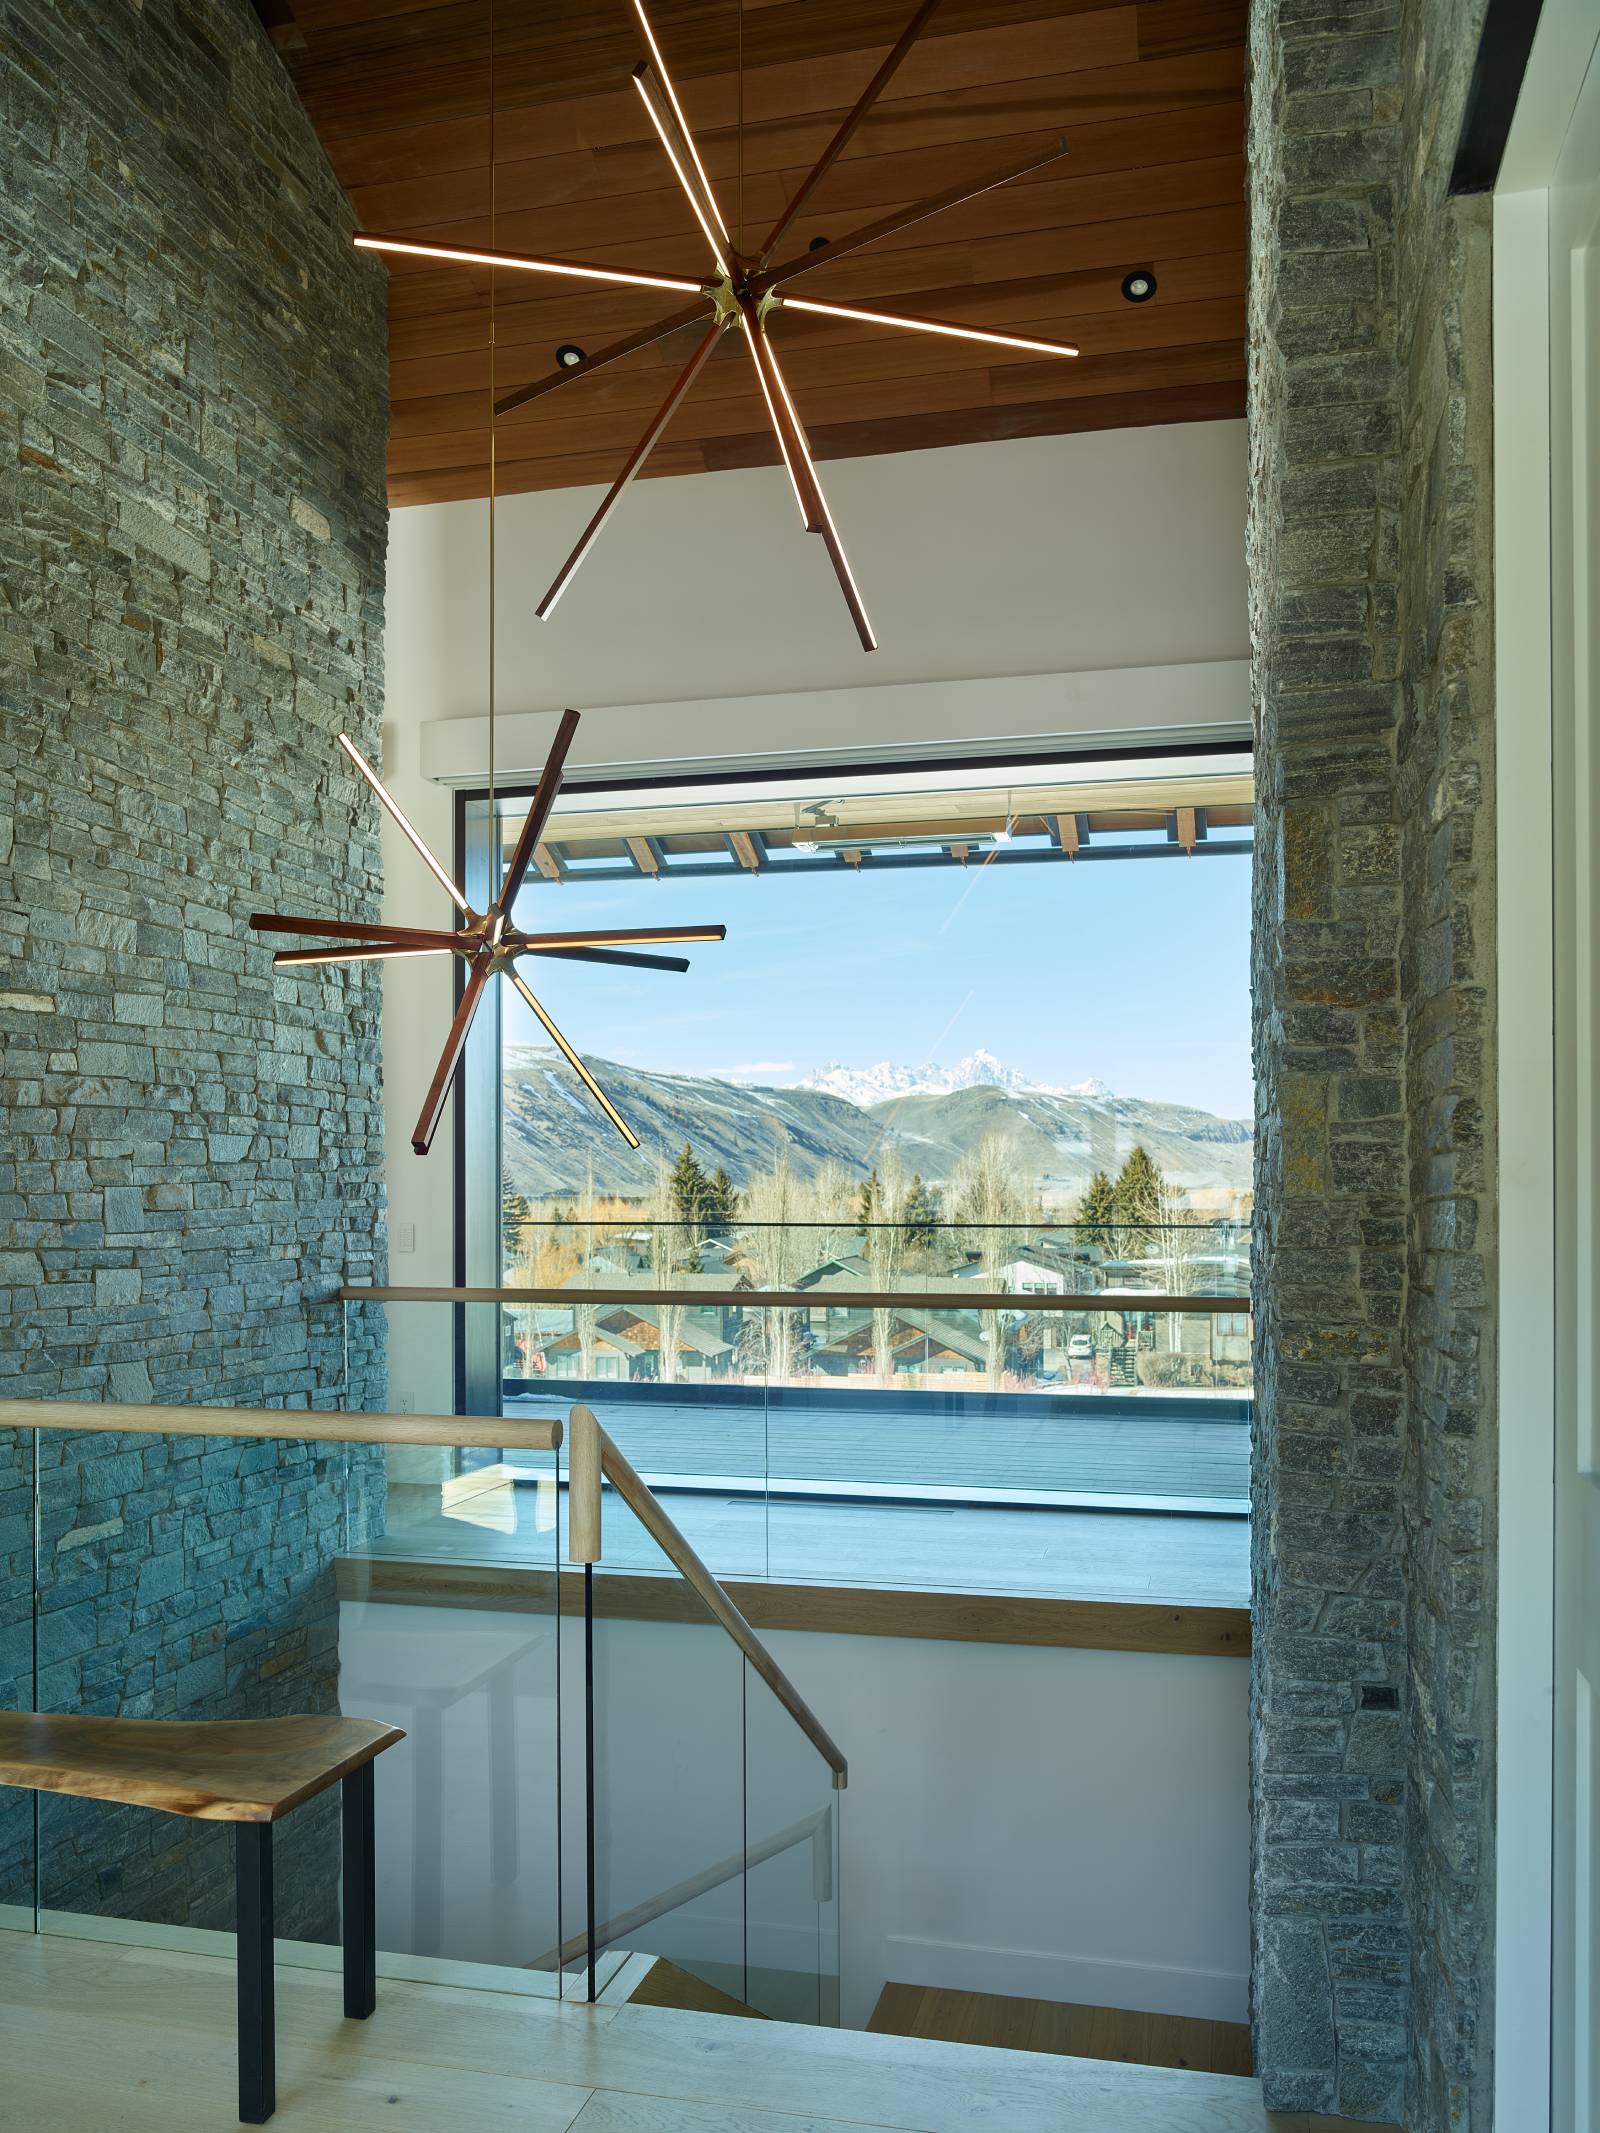 Interior view of the stairwell and picture window at Cache Creek South, a custom home designed and built by Farmer Payne Architects.